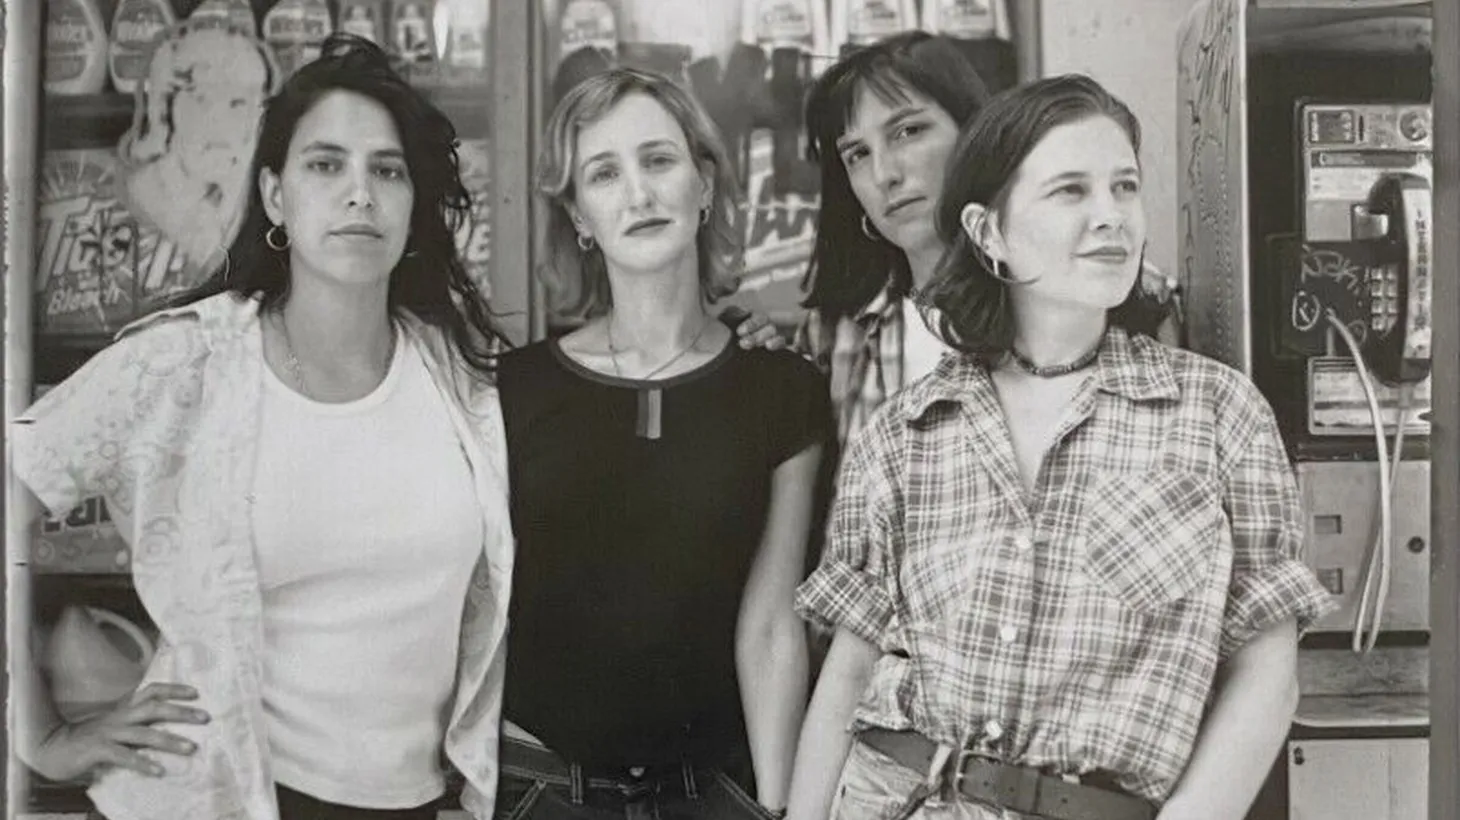 Luscious Jackson in 1994 with Vivian Trimble (second left). Credit: Photo by Danny Clinch.